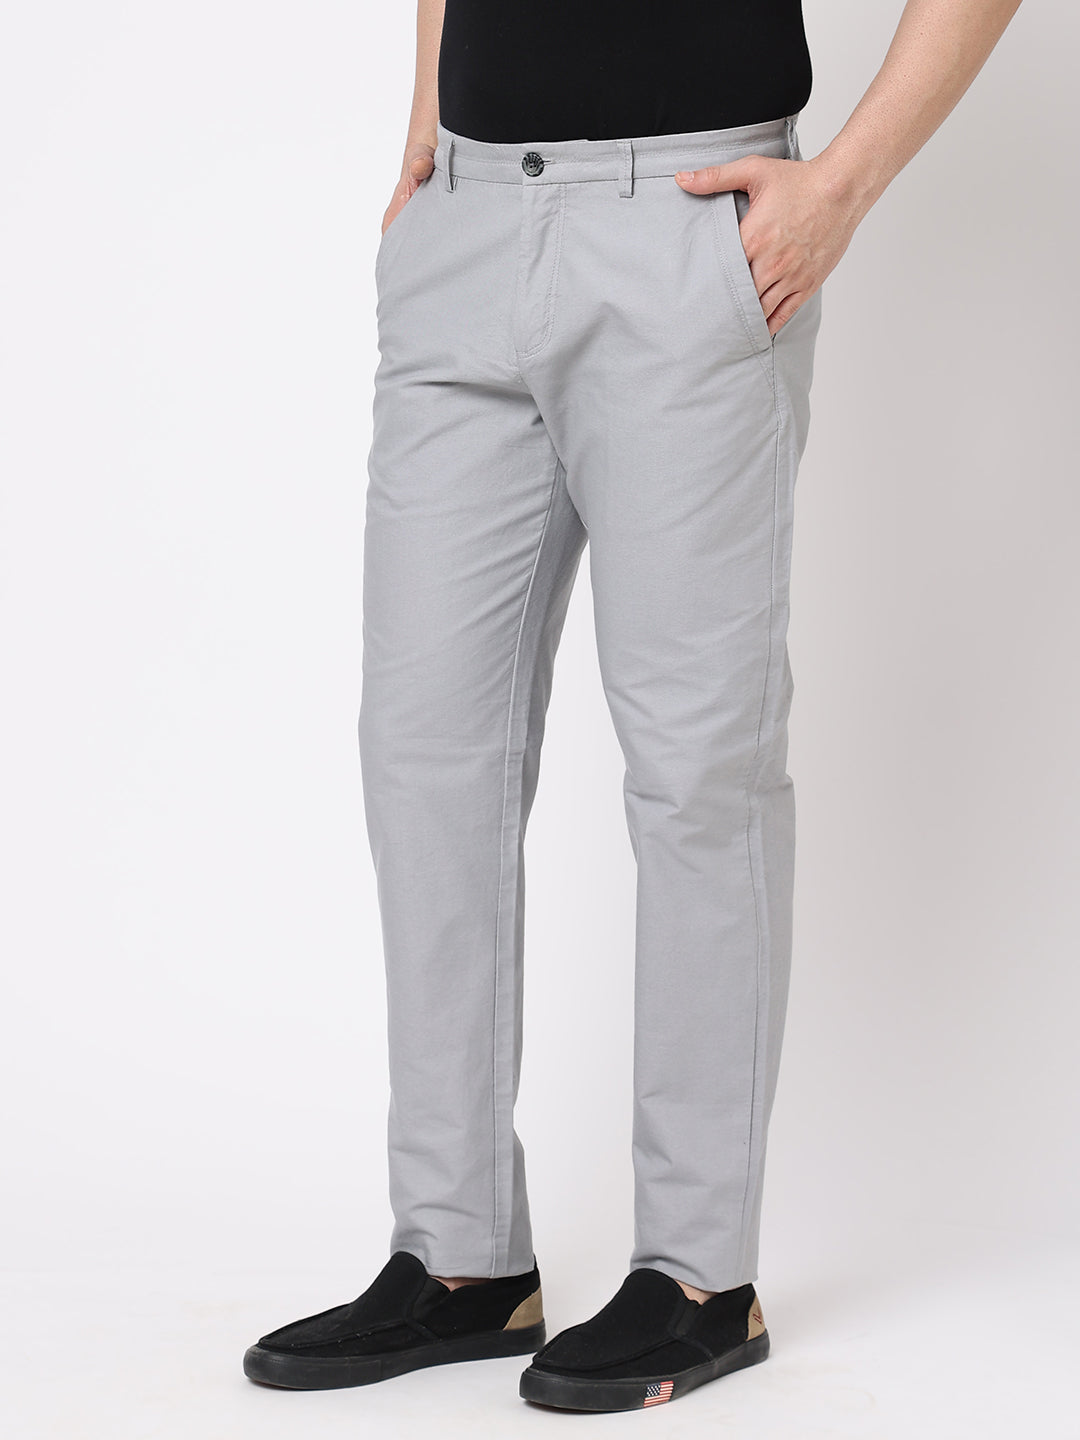 Buy Indian Terrain Khaki Flat Front Slim Fit Low Rise Trousers from top  Brands at Best Prices Online in India  Tata CLiQ